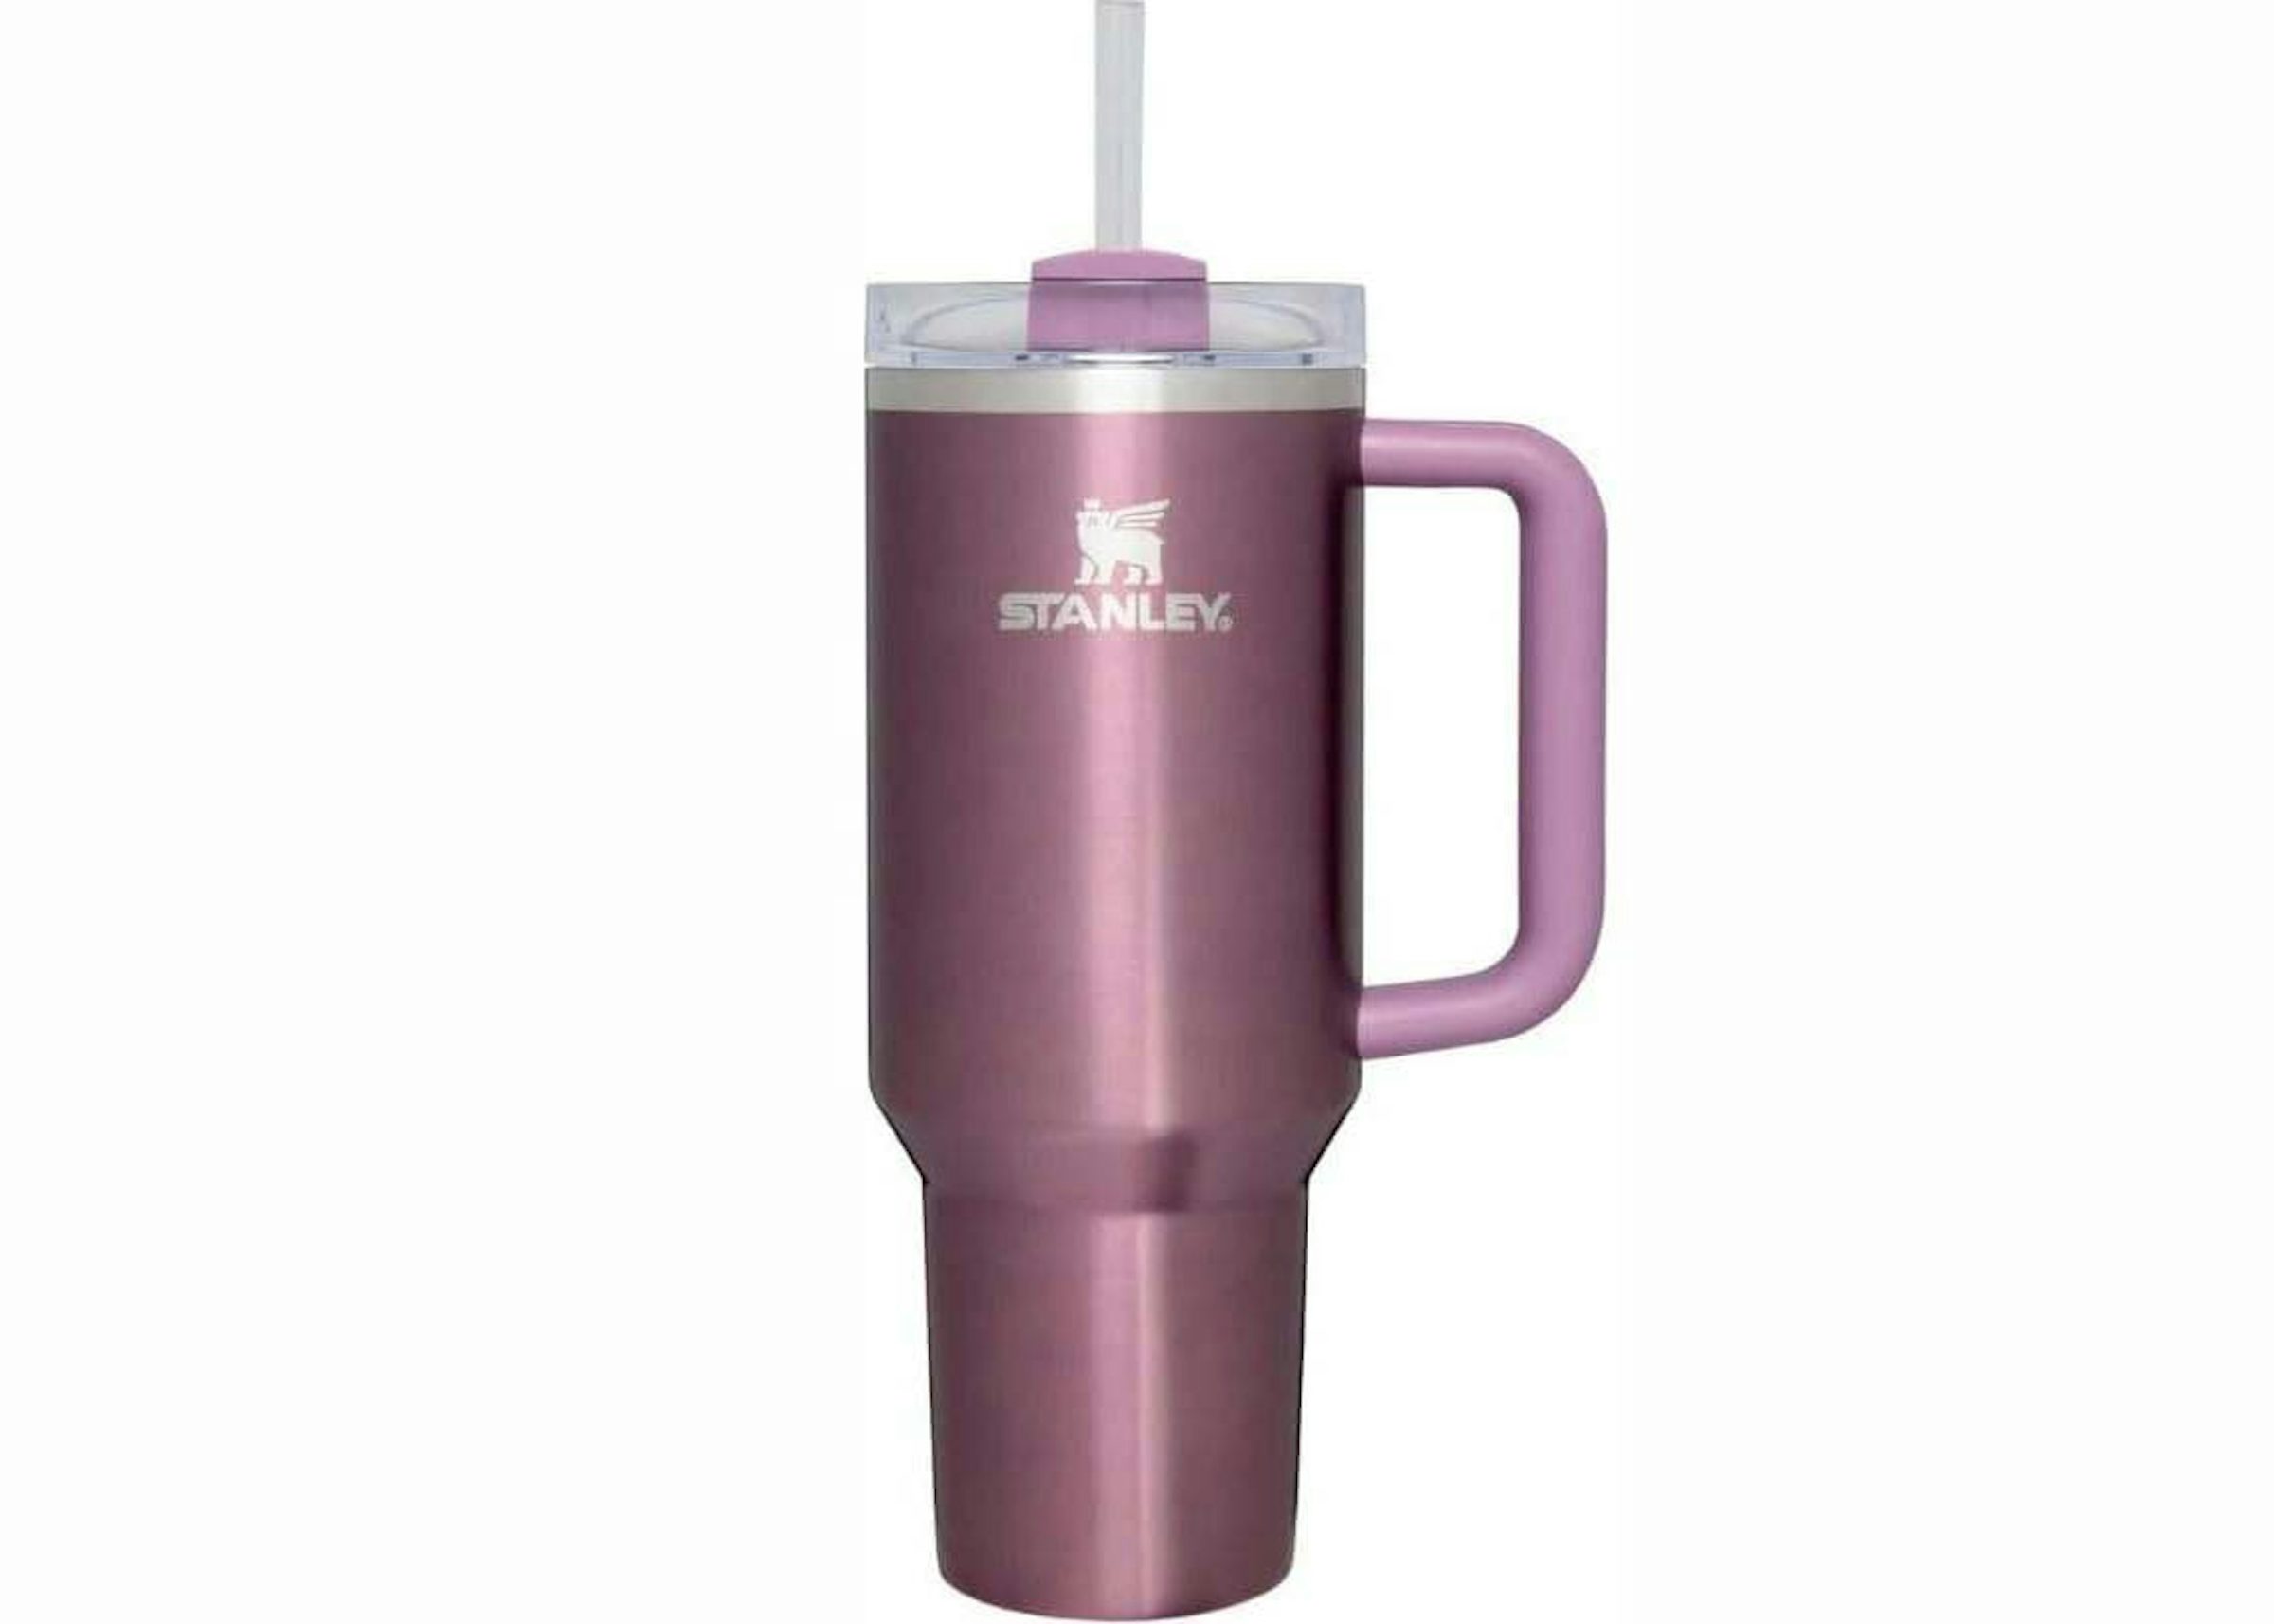 Target Exclusive Pink Flamingo Stanley 40oz Stainless Steel